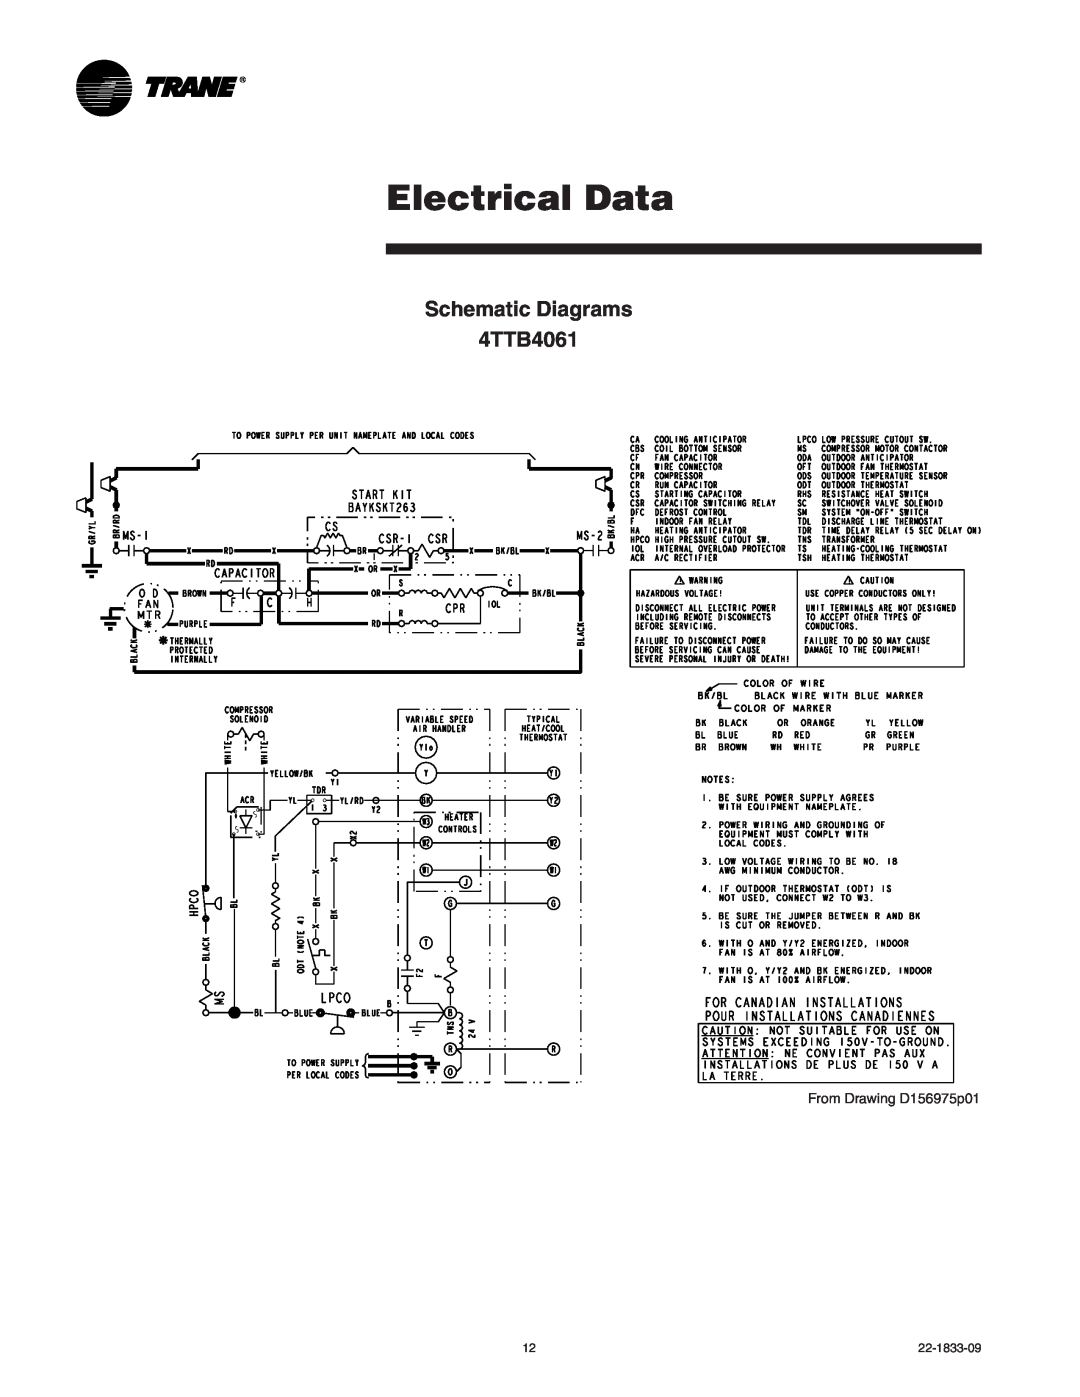 Trane manual Electrical Data, Schematic Diagrams 4TTB4061, From Drawing D156975p01 